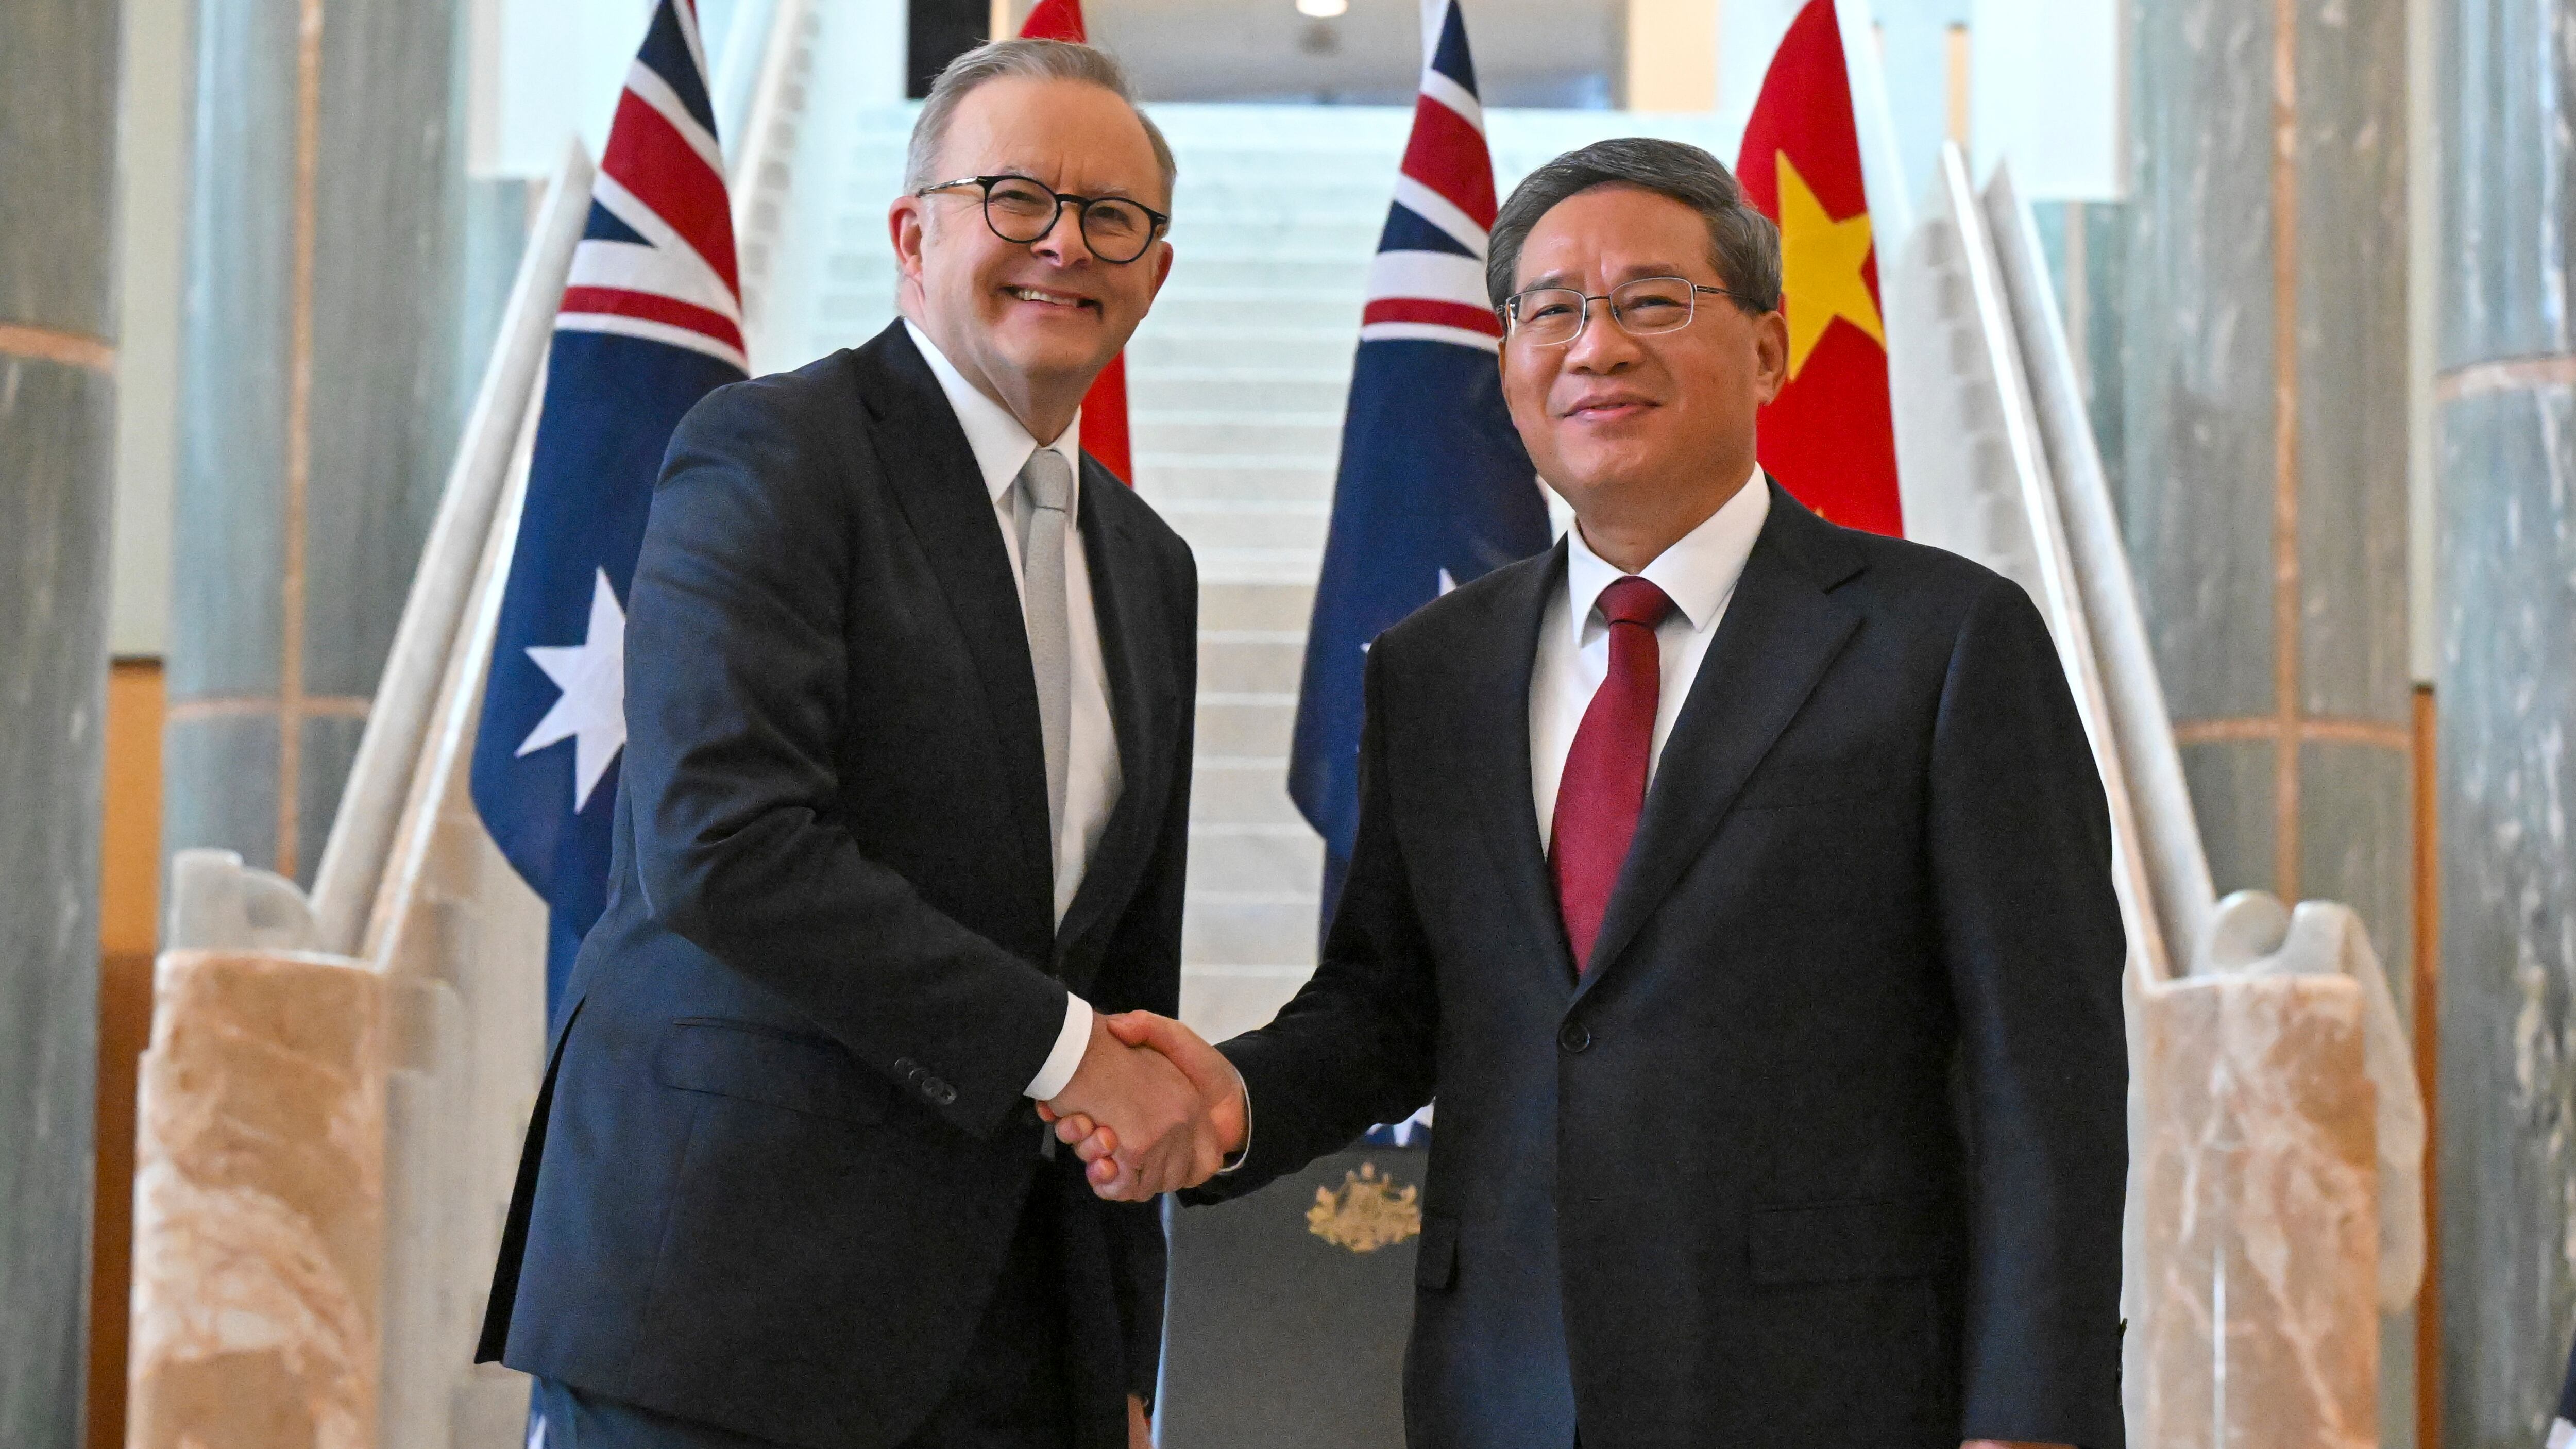 Chinese Premier Li Qiang and Australia’s Prime Minister Anthony Albanese shake hands at Parliament House in Canberra, Australia (Mick Tsikas/AP)